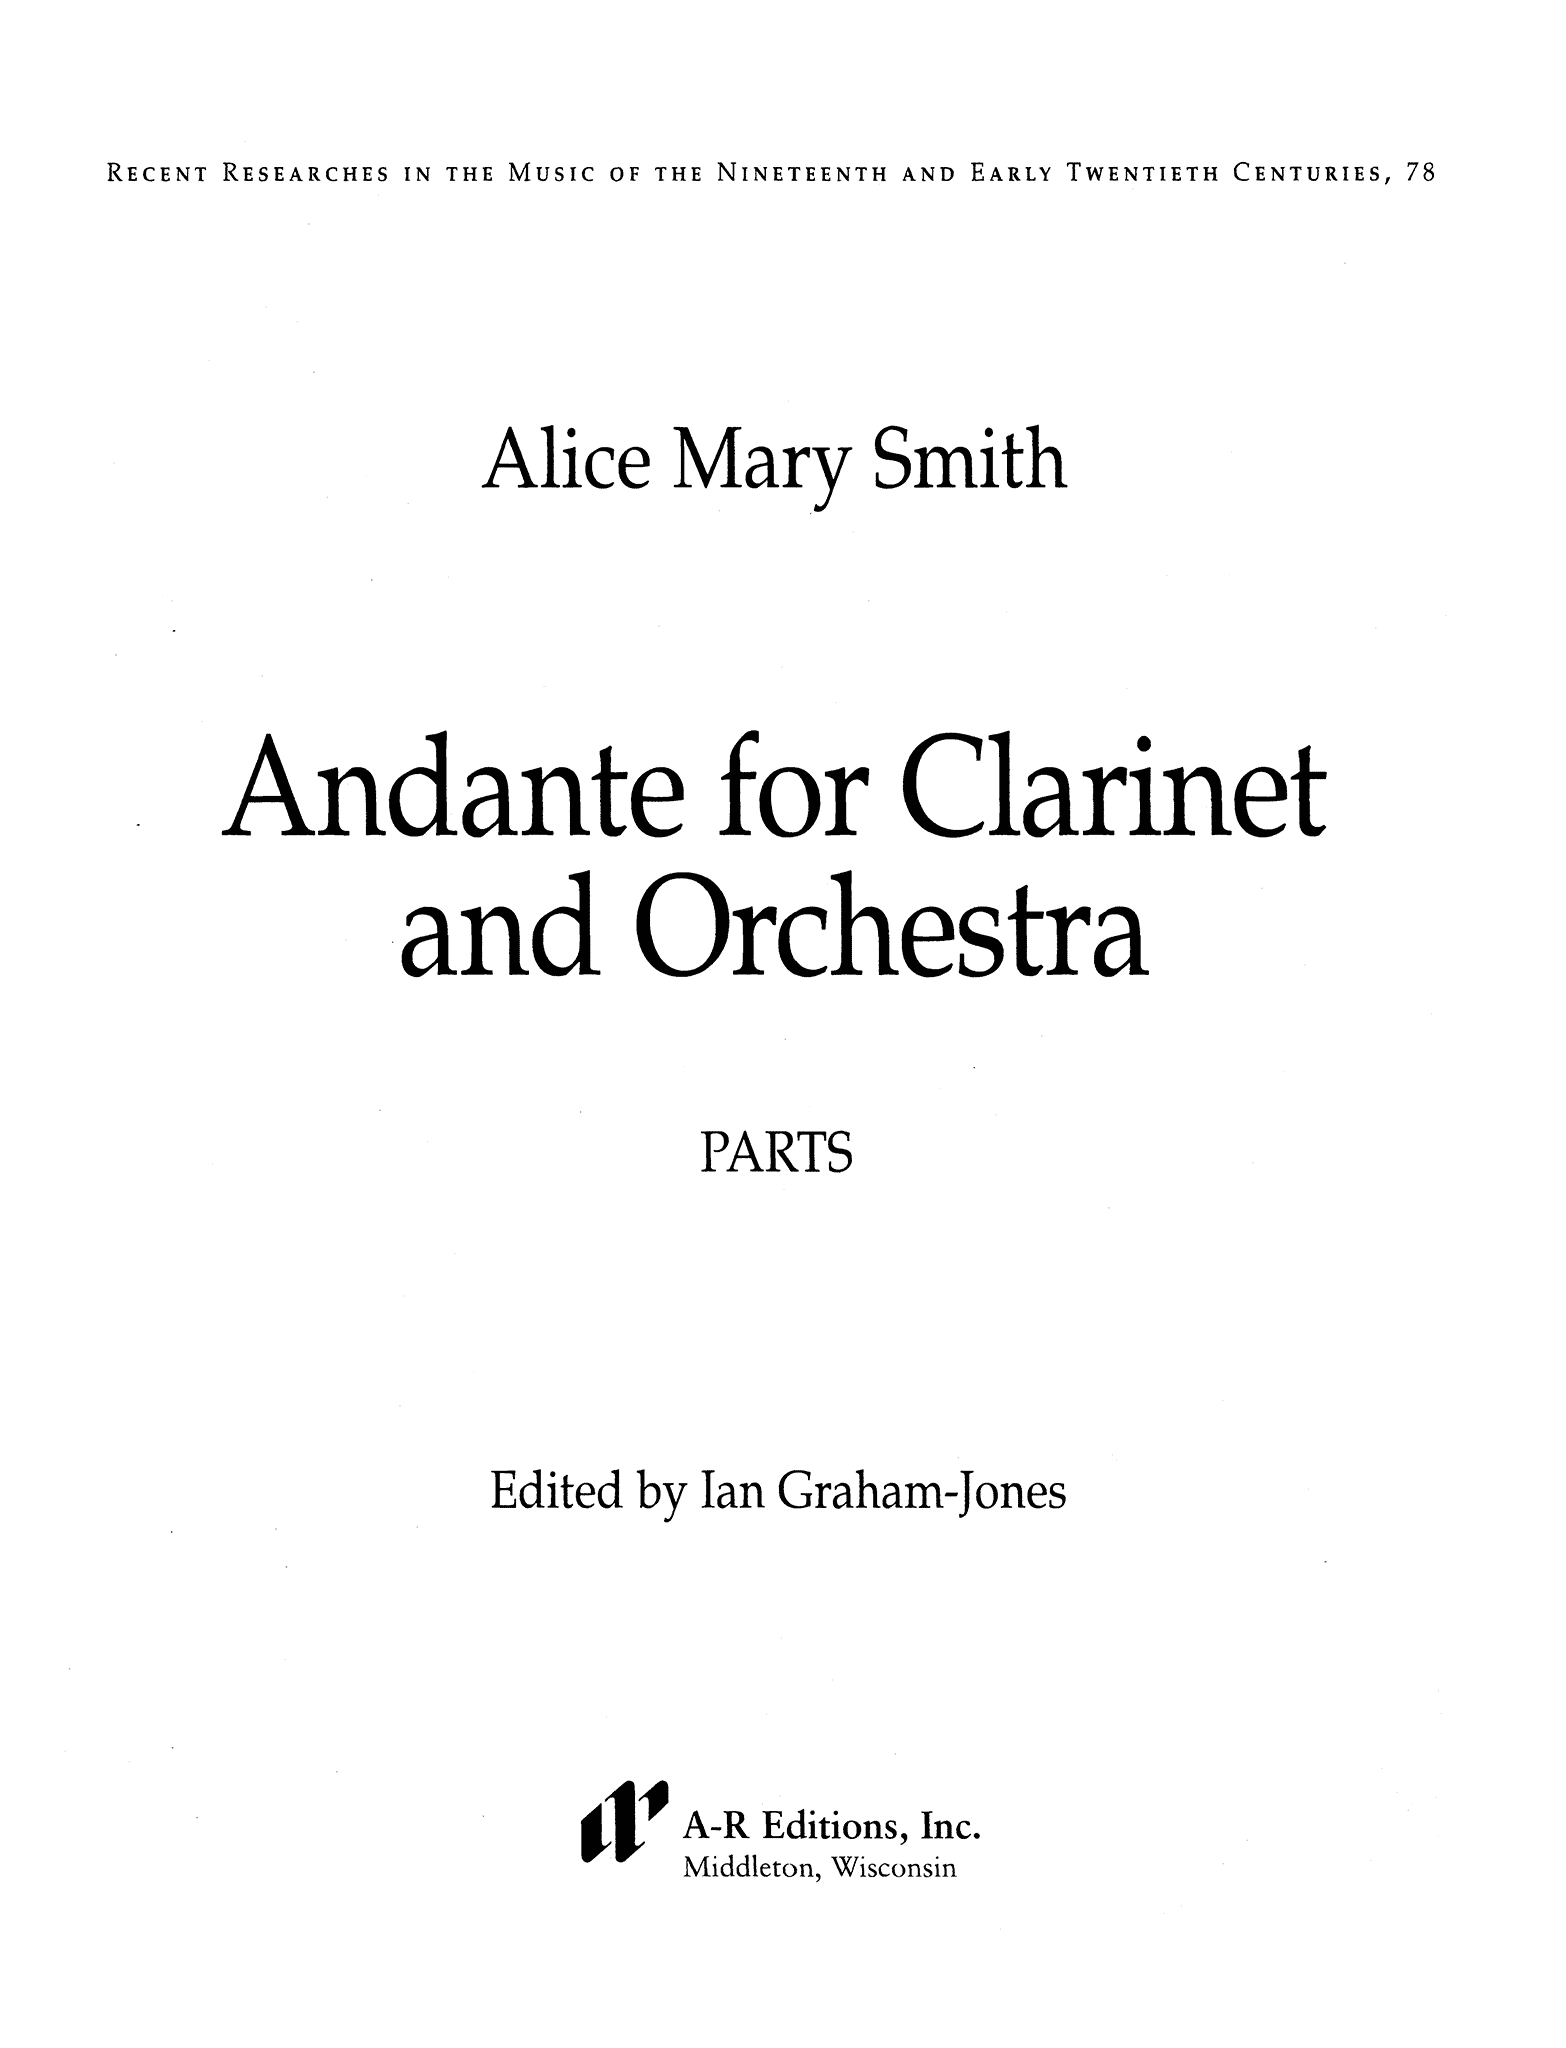 Smith Andante for Clarinet & Orchestra Cover